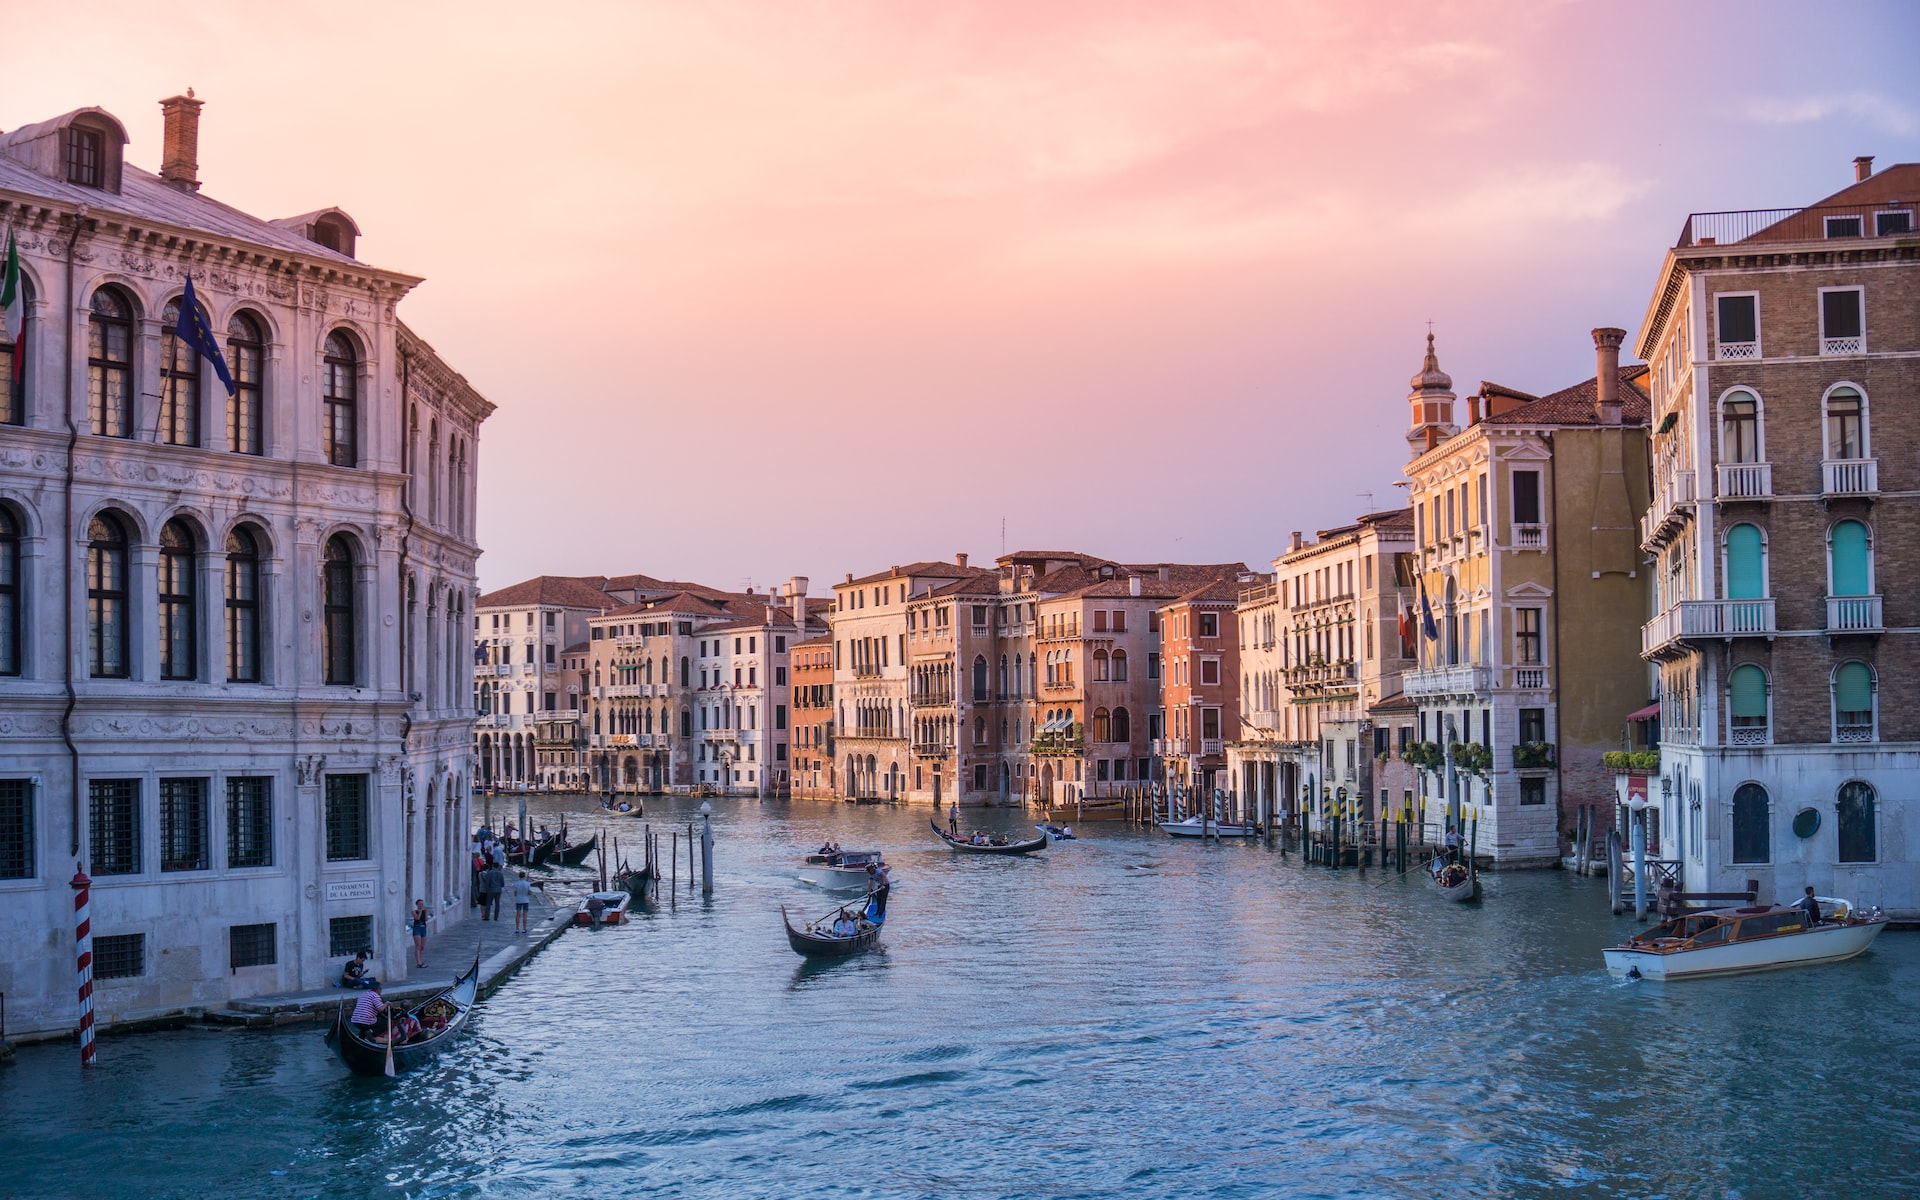 The romantic canal of Venice, one of the best cities in Italy
